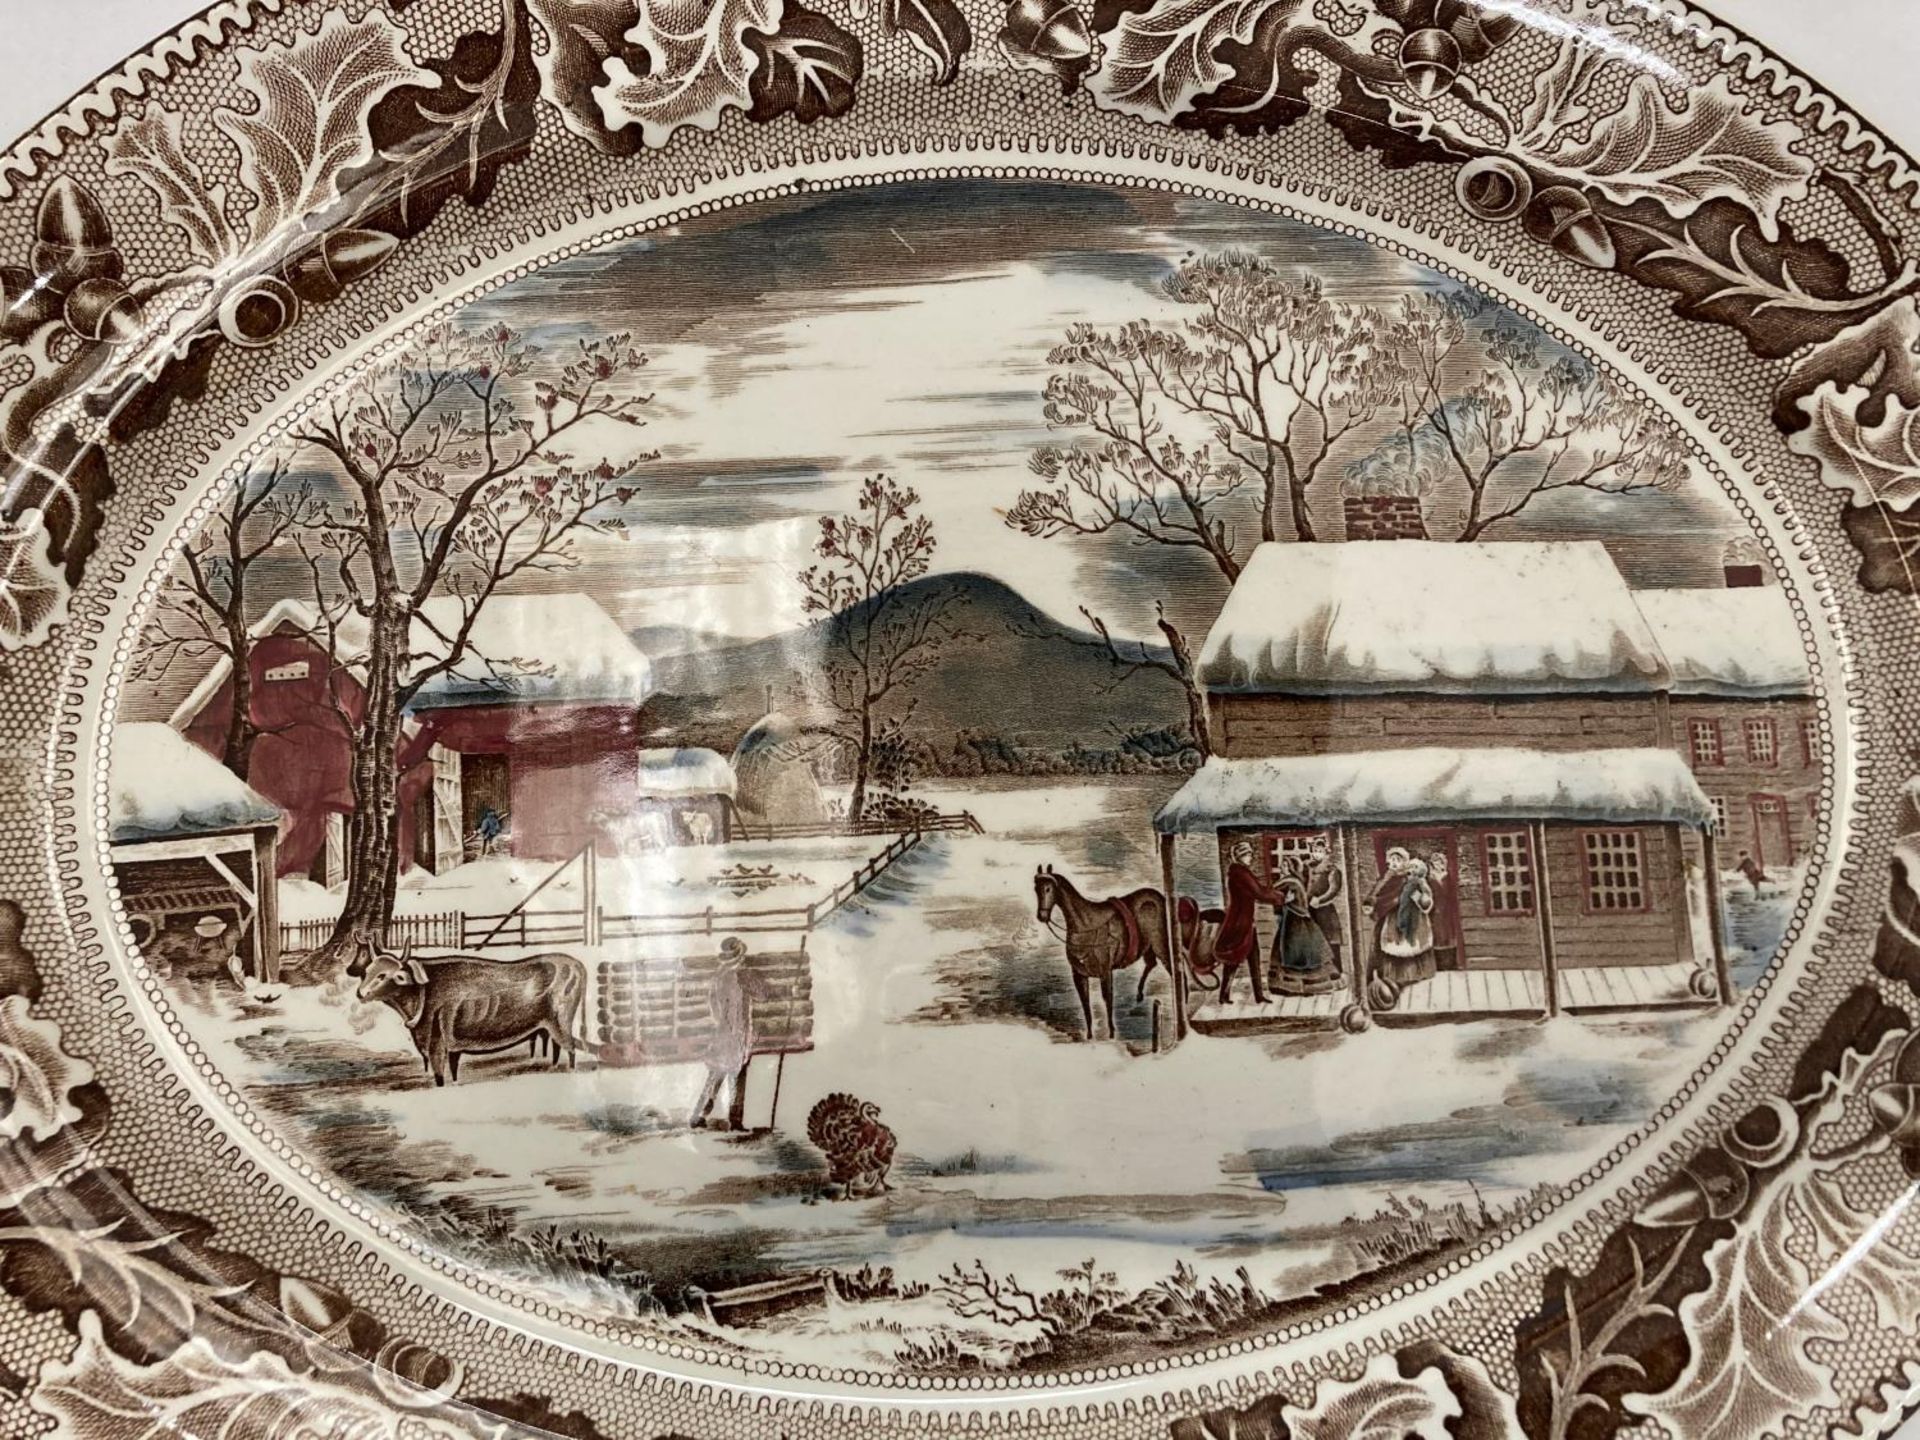 A LARGE JOHNSON BROS OVAL MEAT PLATTER WITH A FARMYARD SCENE - HOME FOR HISTORIC AMERICA - Image 9 of 9